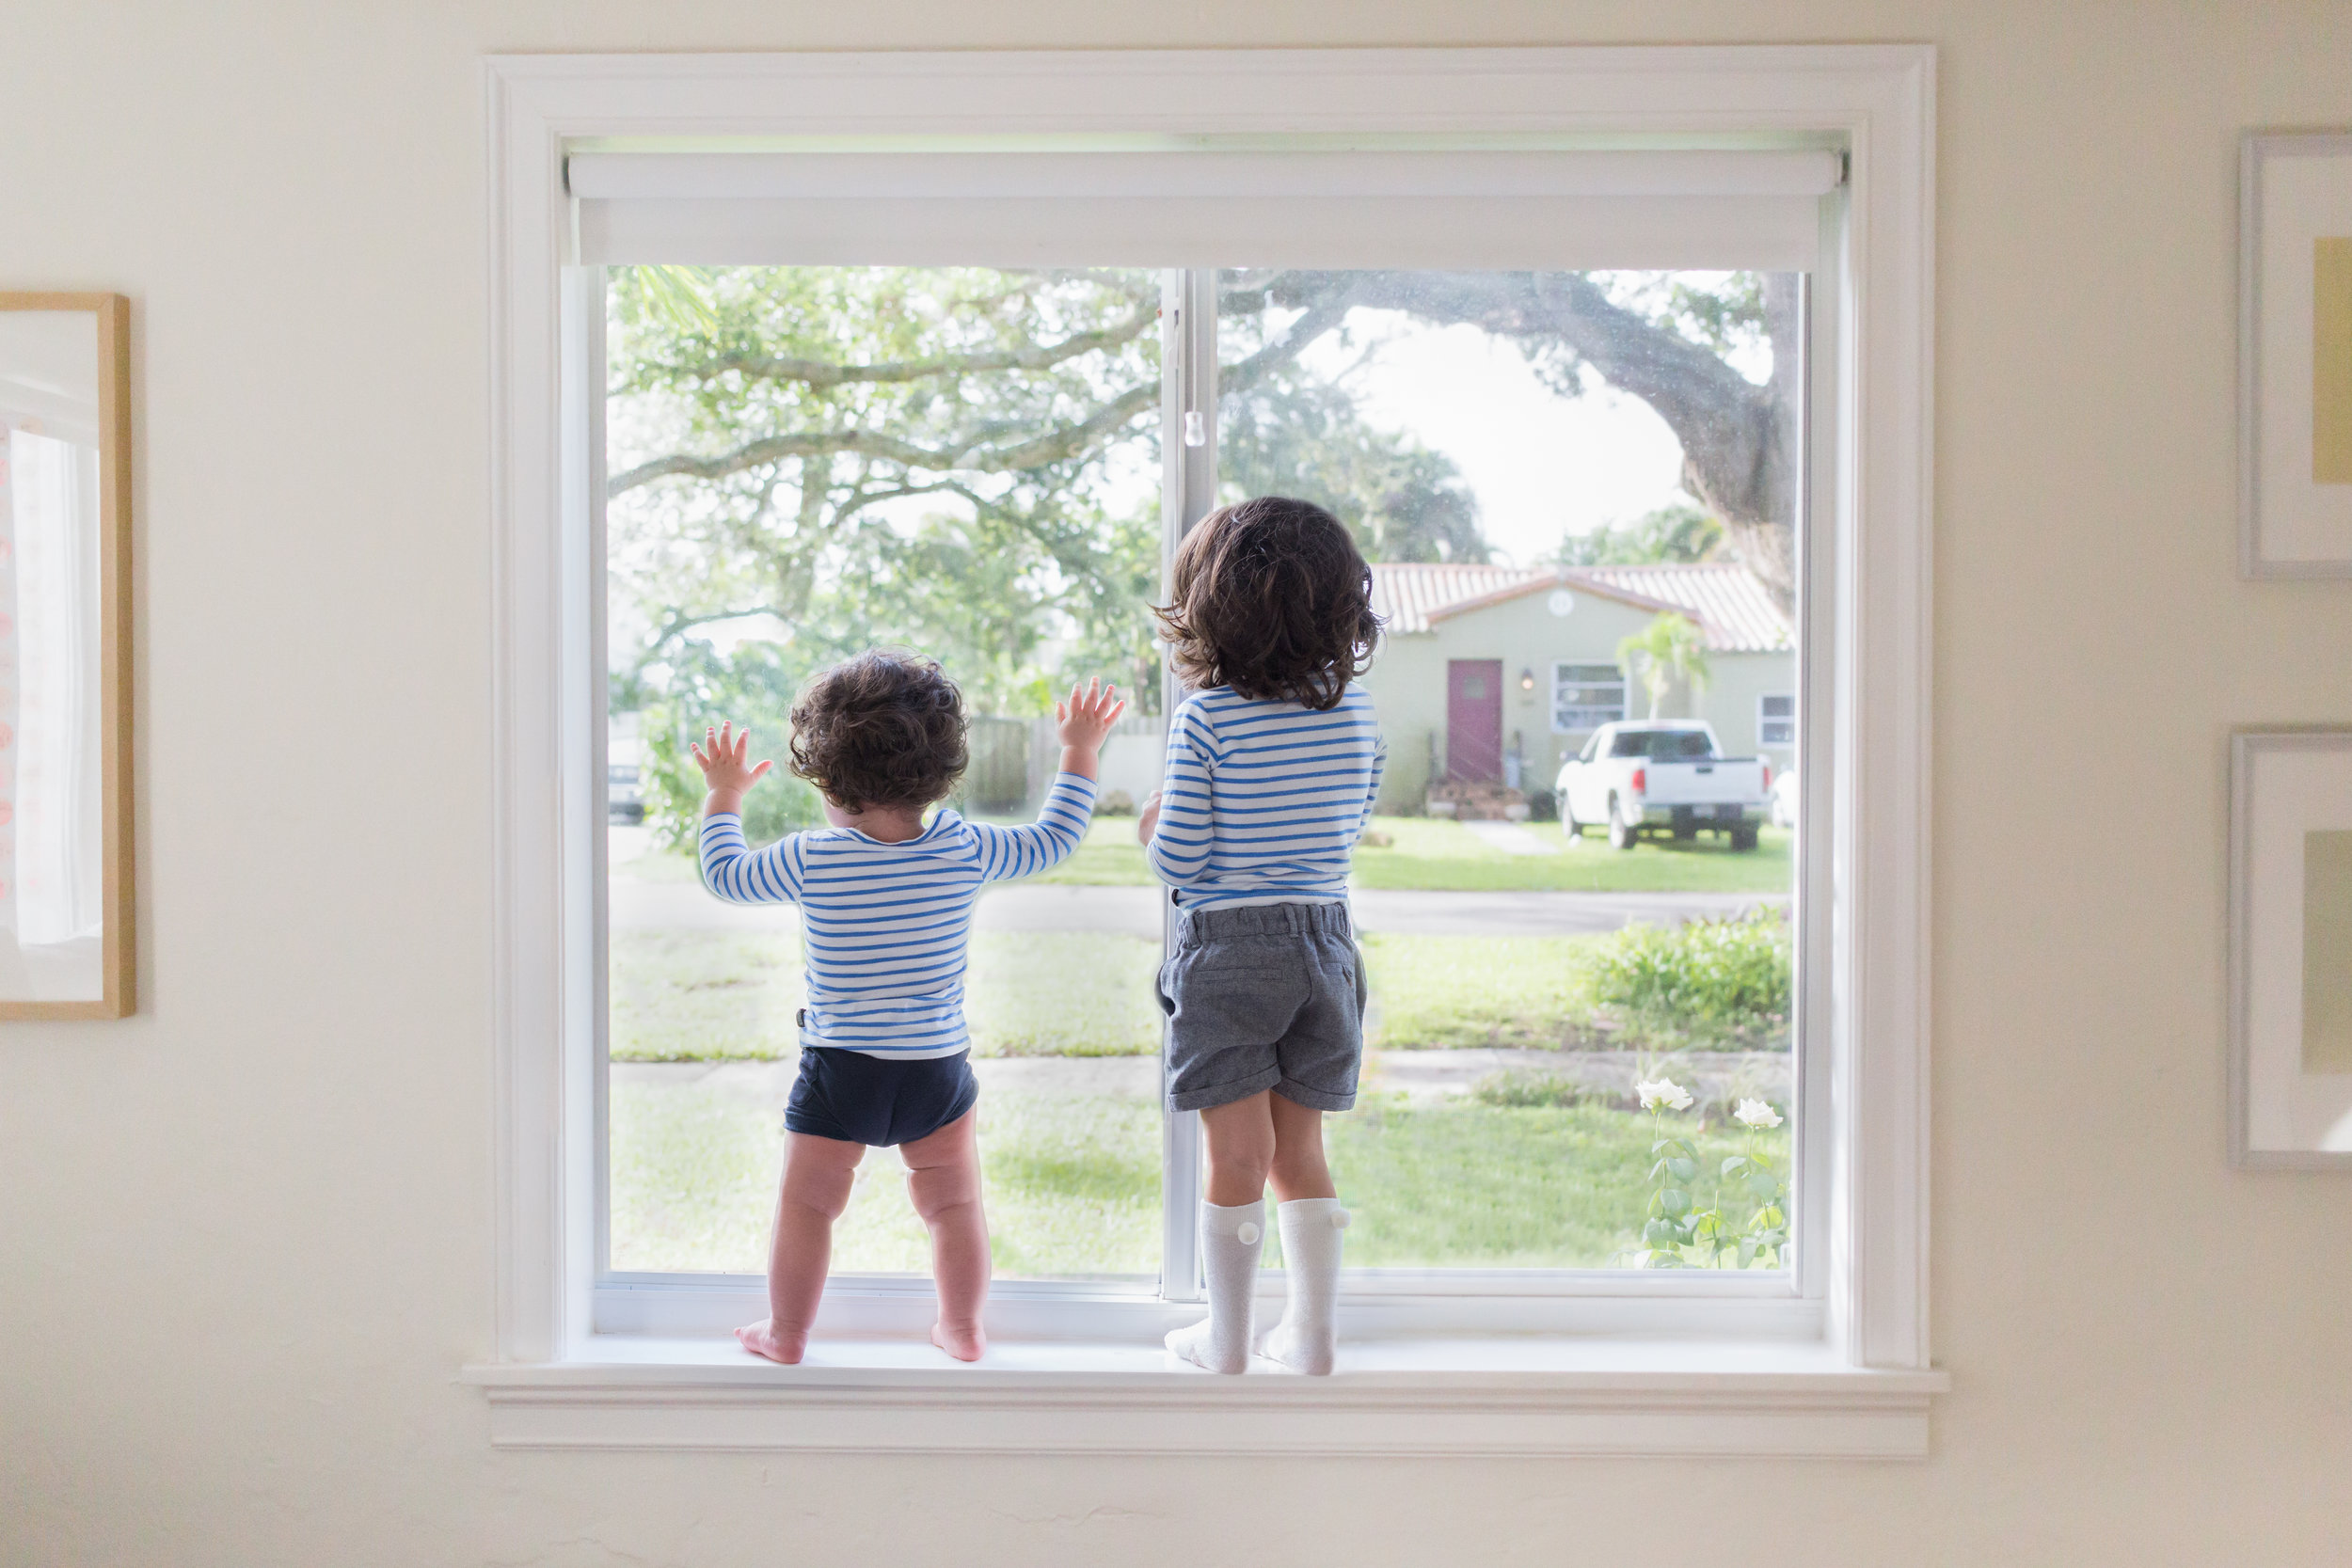 (NOTE: This is a composite image. Mom and Dad were right below the children. A seperate image of the window was taken afterwards. The children were never in any danger.)